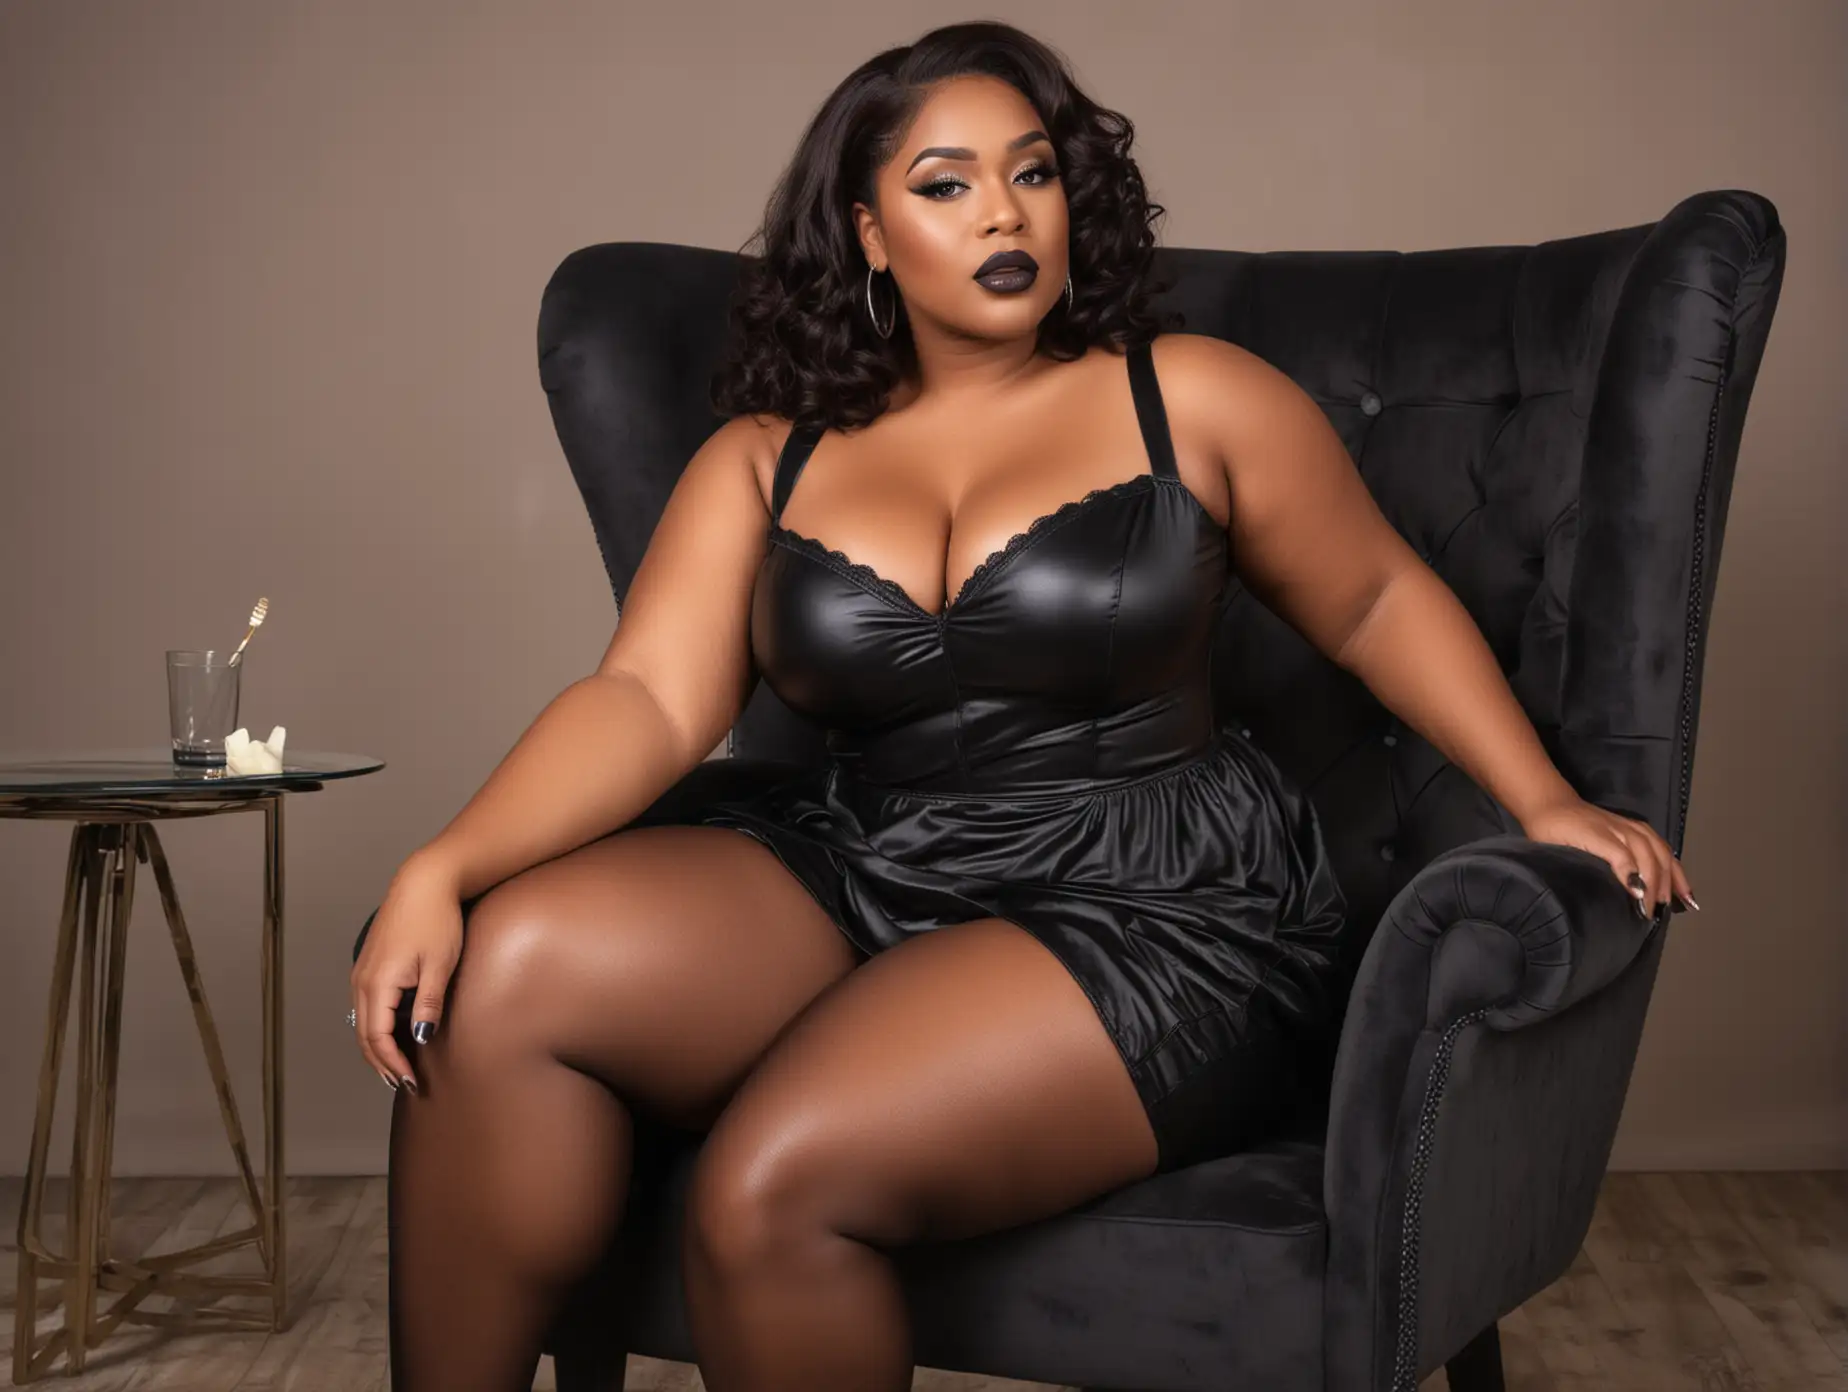 Elegant Plus Size Black Woman with Bold Makeup Sitting in Chair